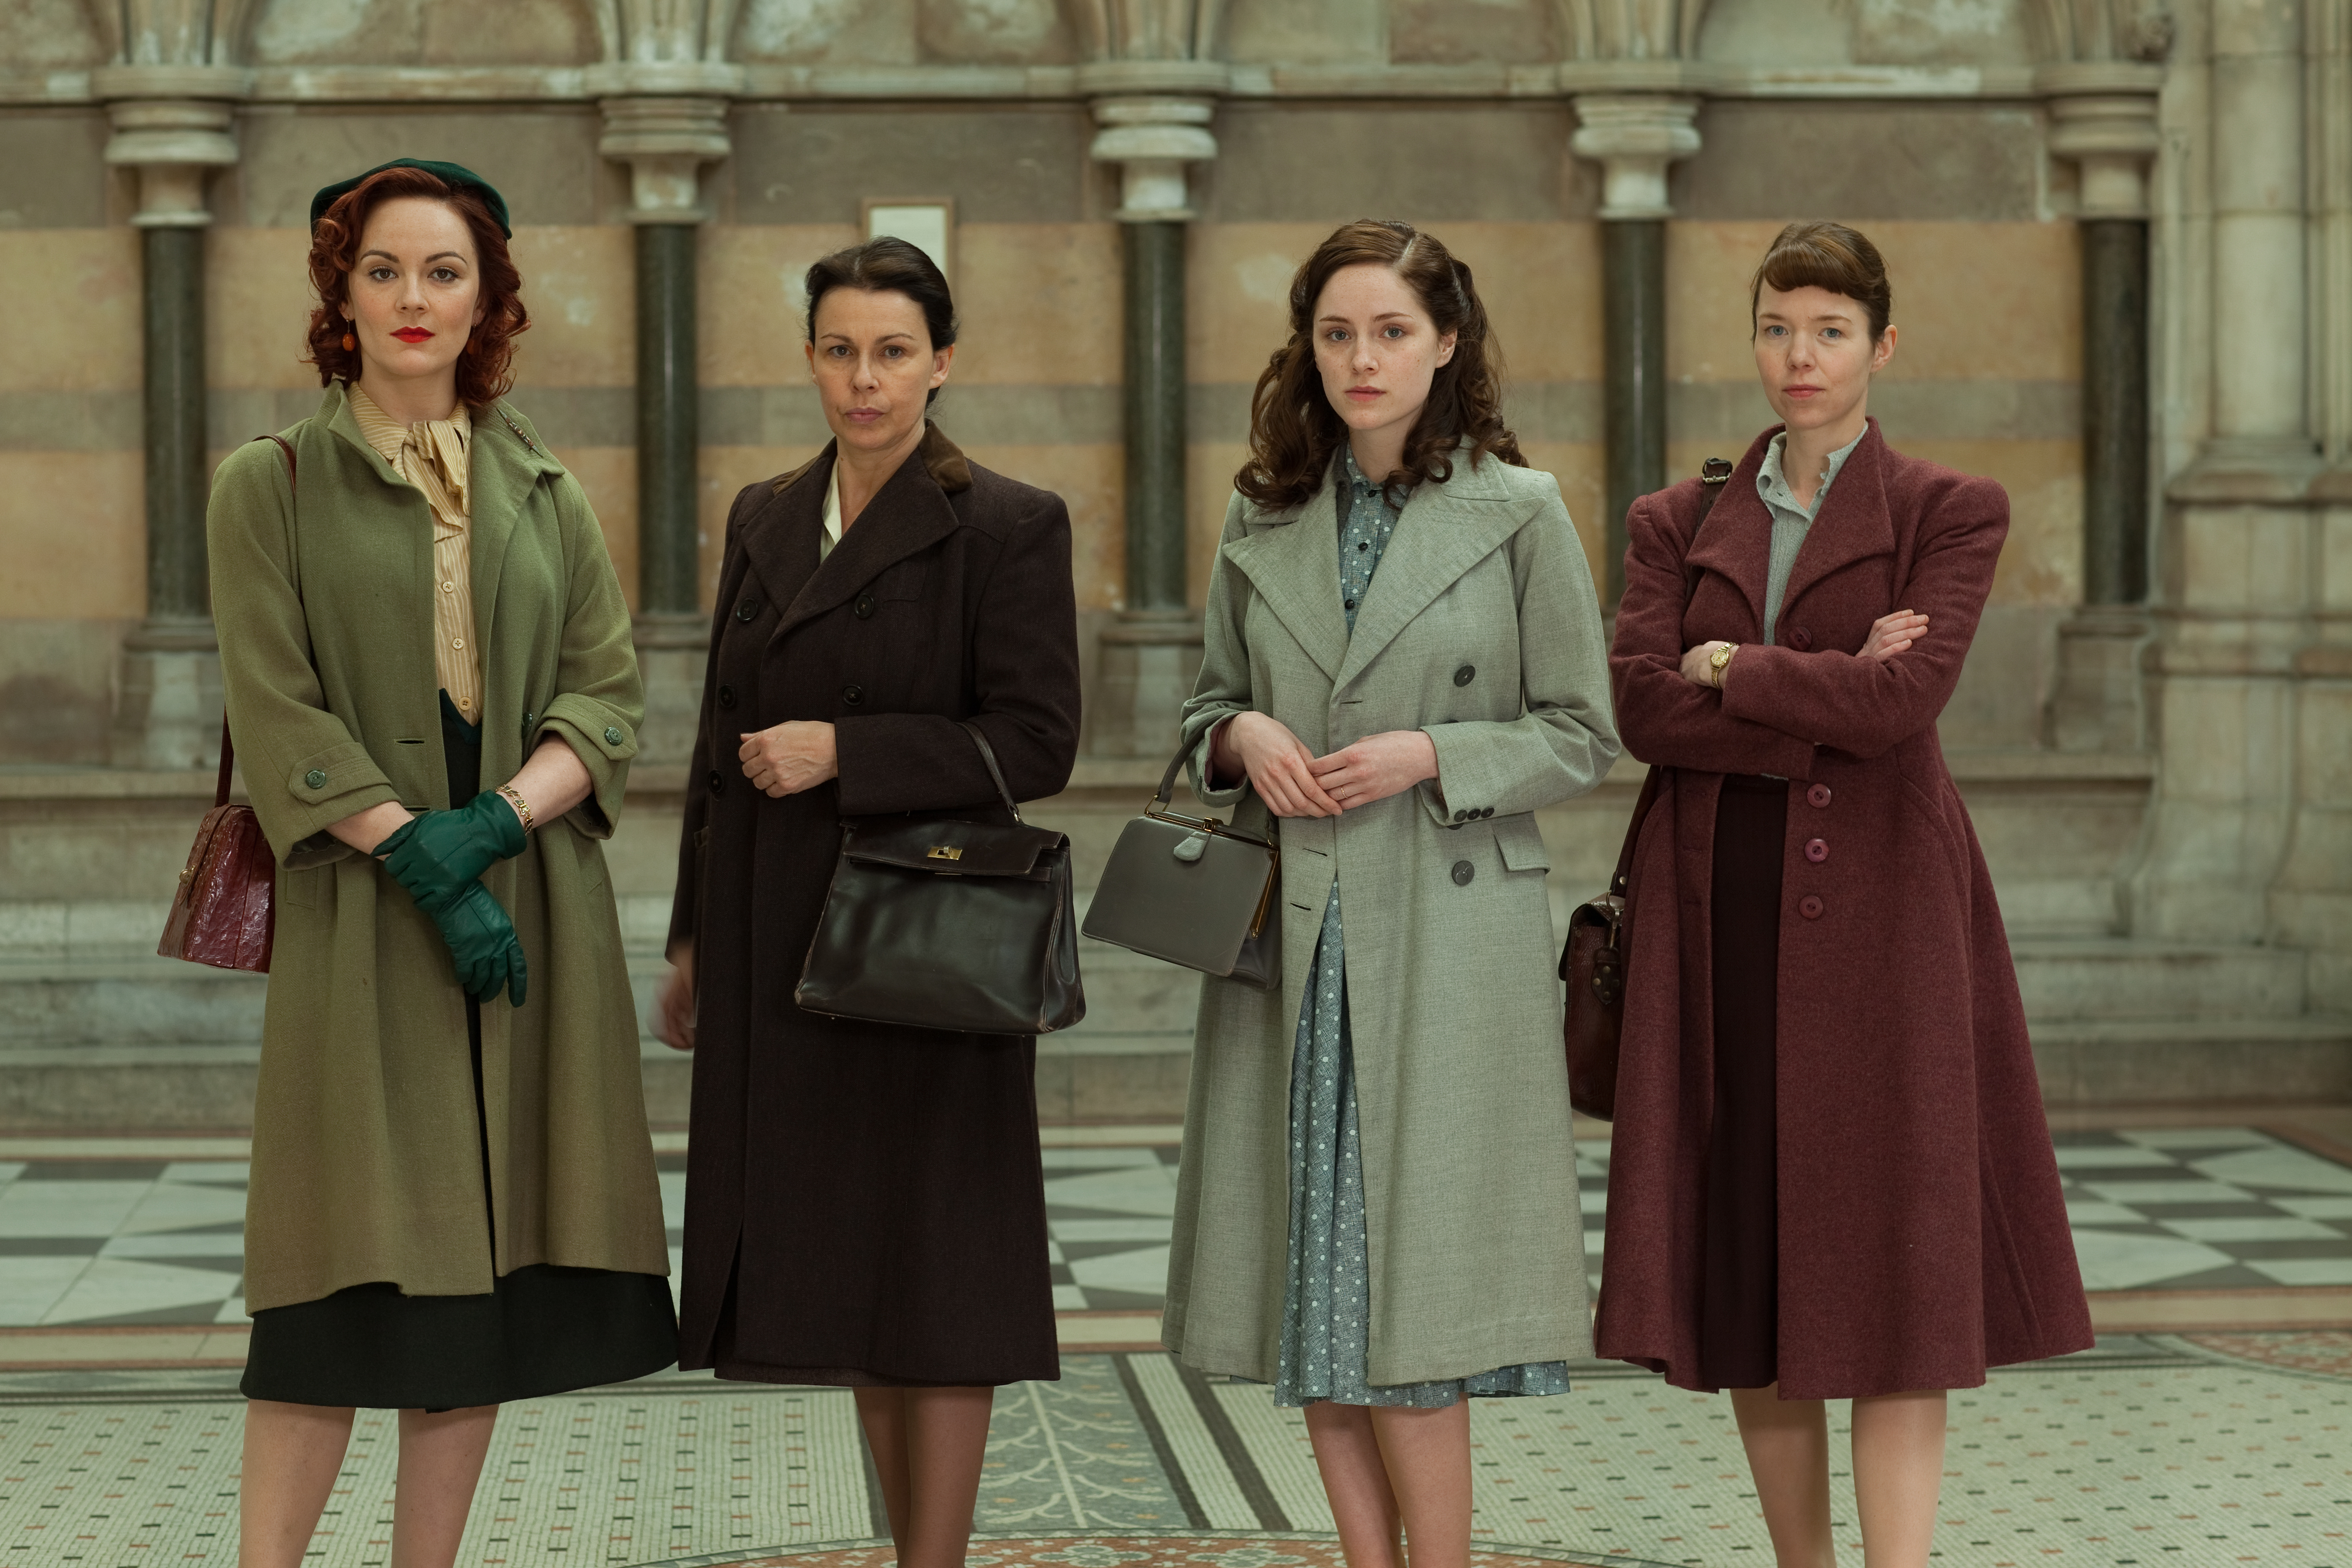 Millie, Jean, Lucy and Susan will all be back for Series 2 (Photo: Courtesy of ©Laurence Cendrowicz/World Productions)